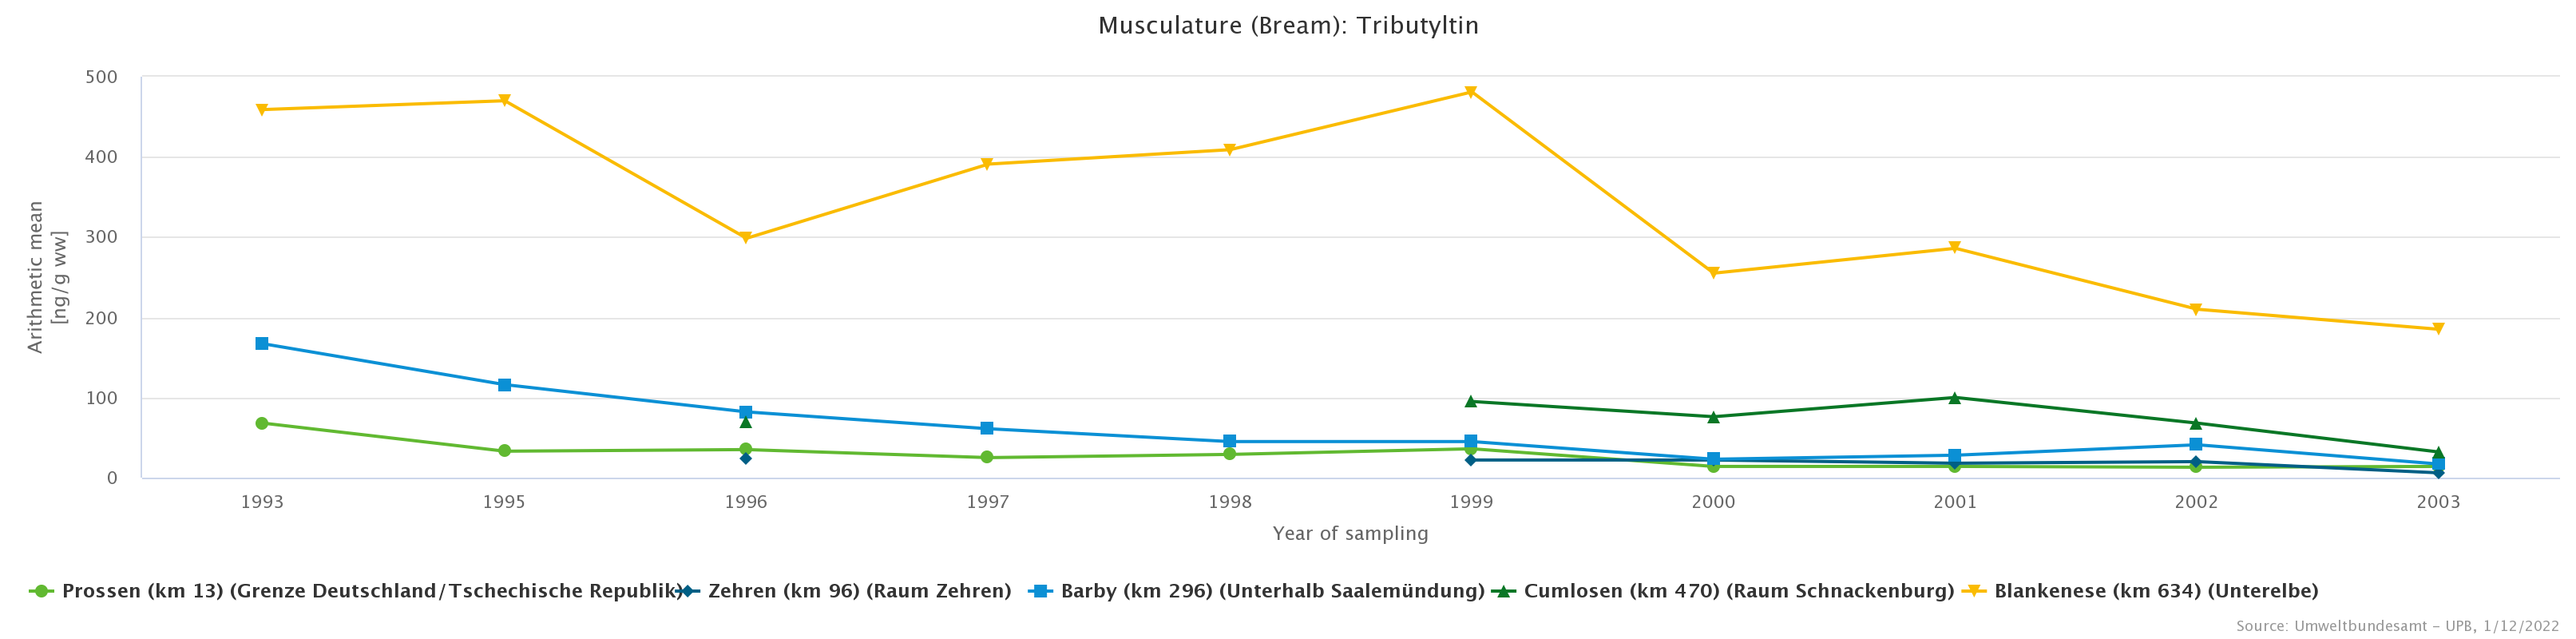 Decreasing TBT levels of bream between 1993 and 2003 by 50 to 90%.